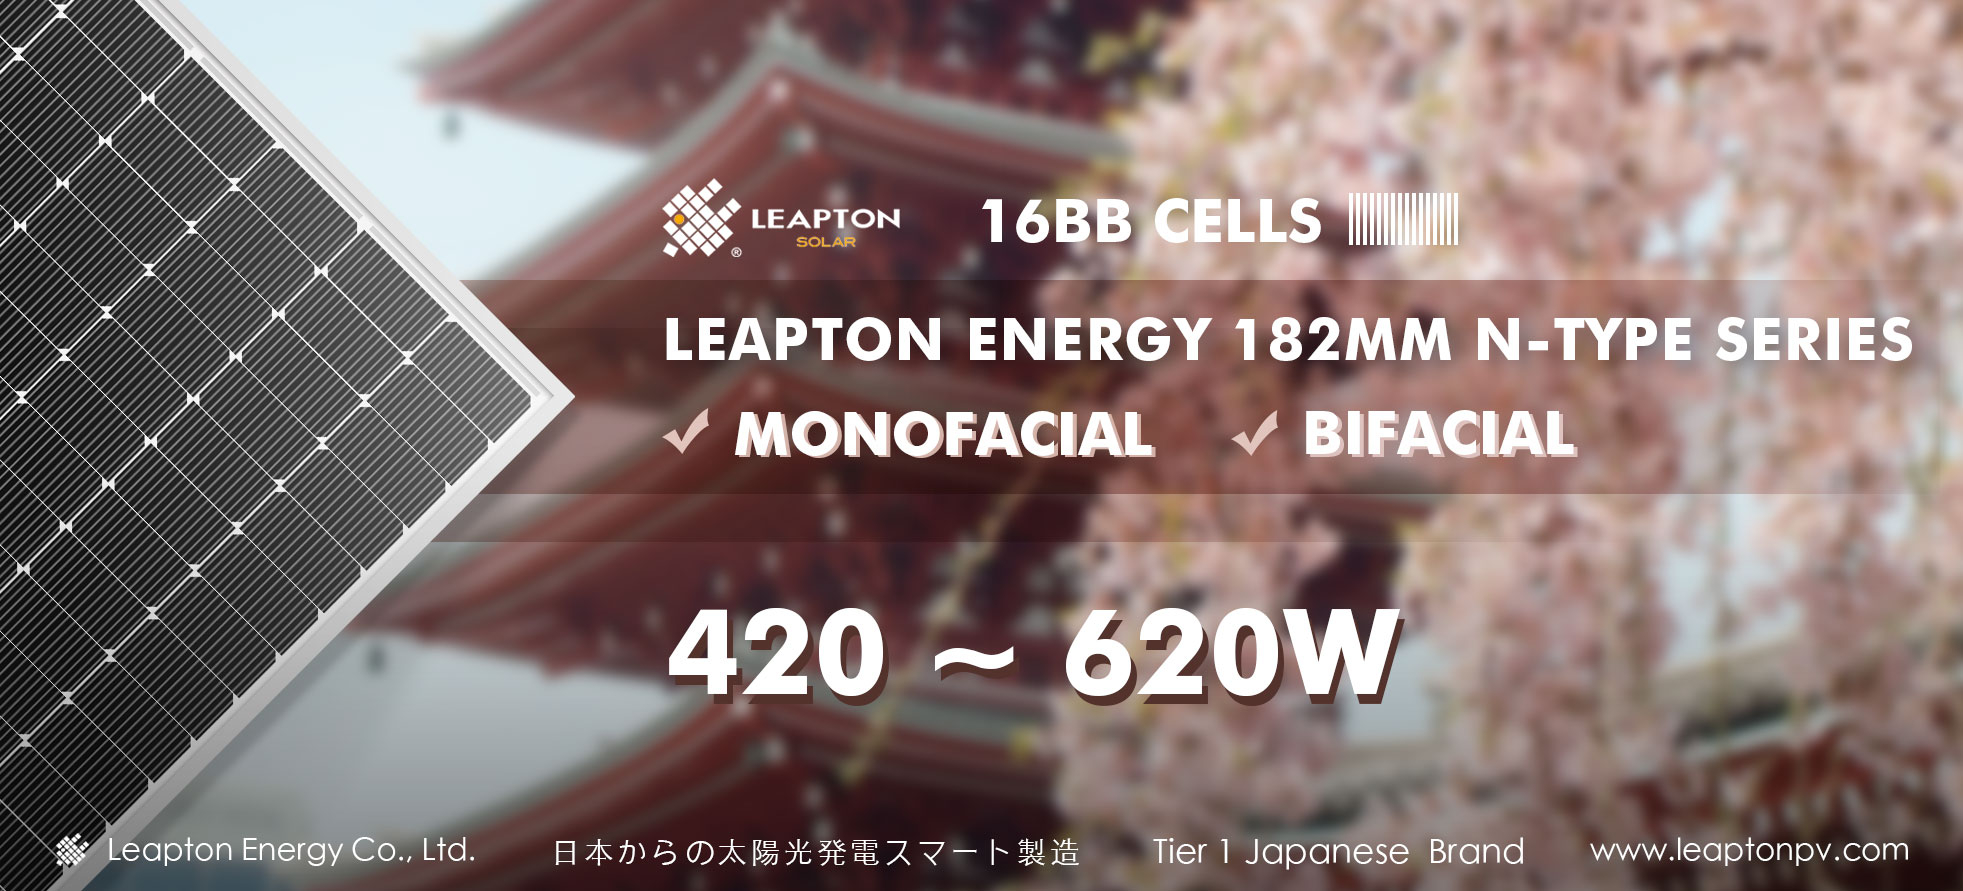 Leapton Energy new products: 182mm N-Type series